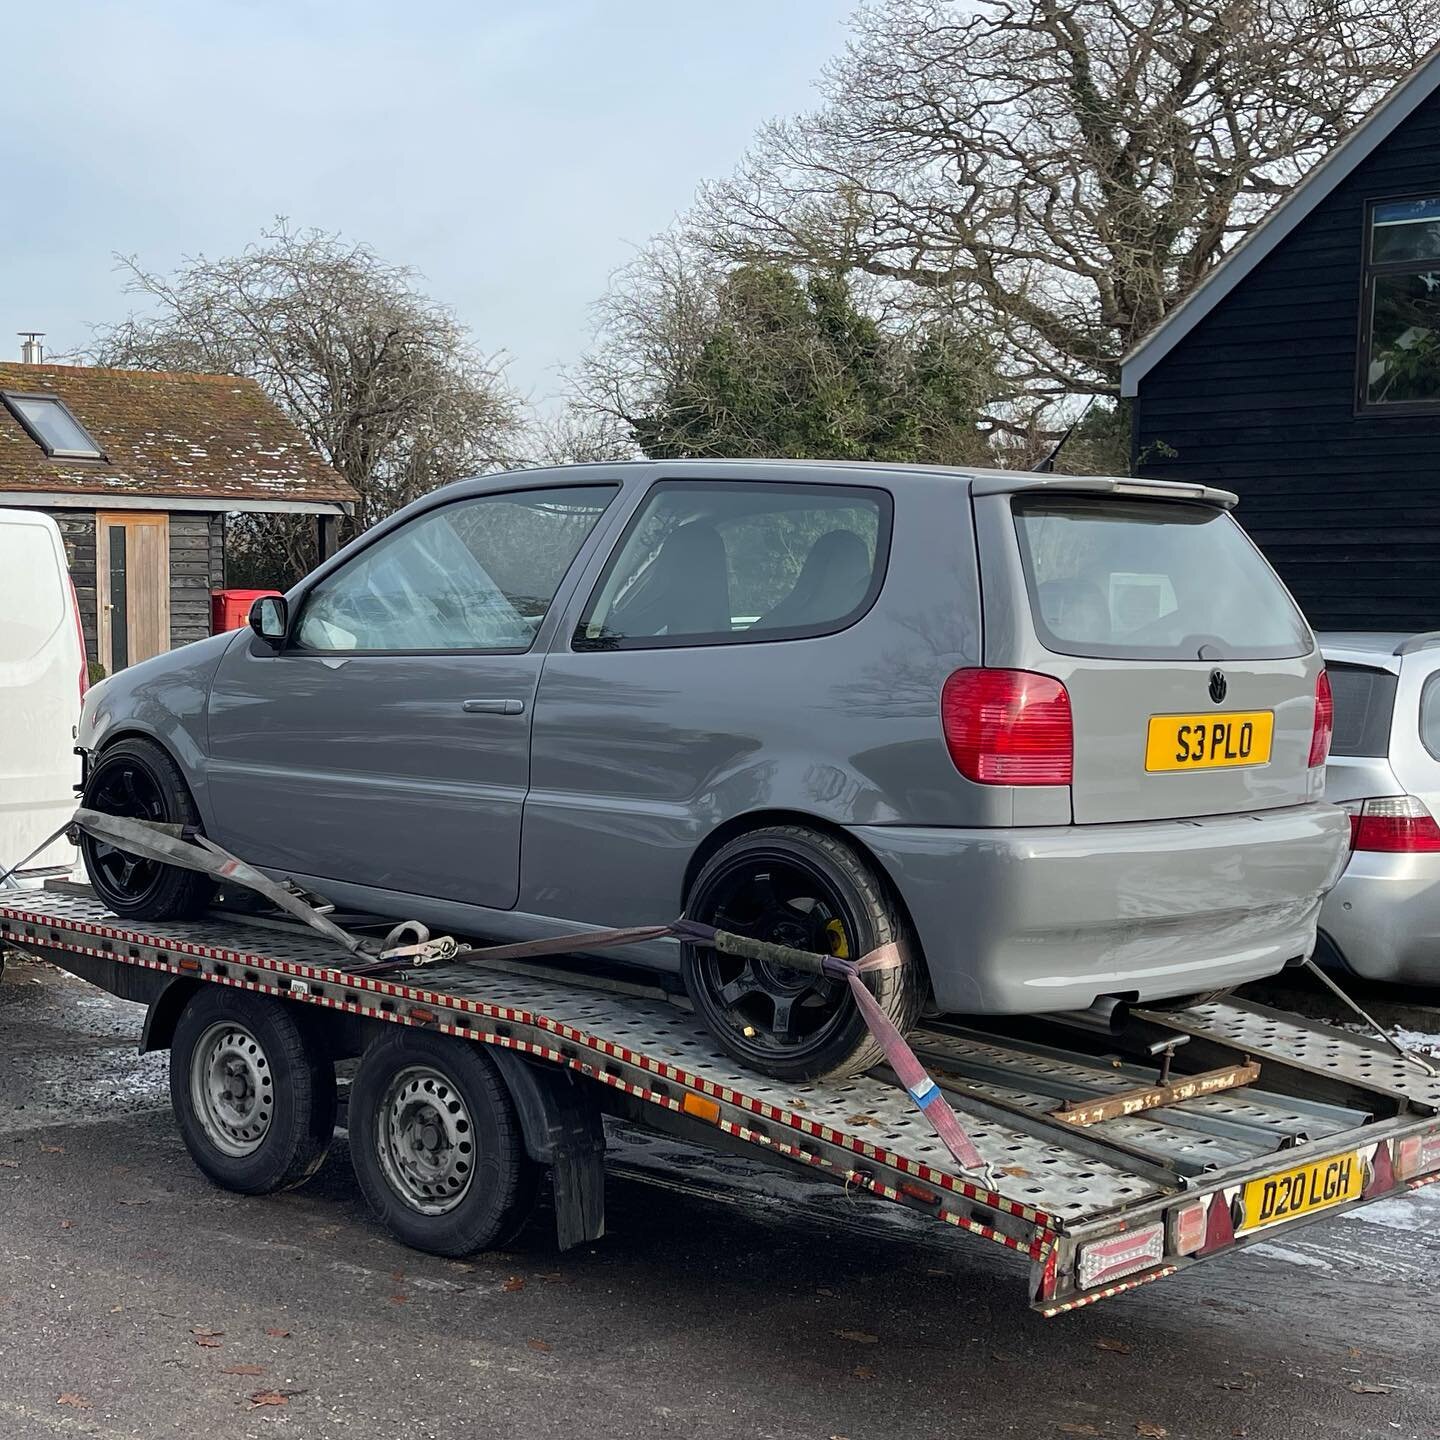 The 4th 4wd polo we&rsquo;ve built is finally leaving HQ to be finished off at the body shop before heading off to mapping. We absolutely love doing these conversions so if anyone is thinking about going down the awd route, please get in touch. 

Pol